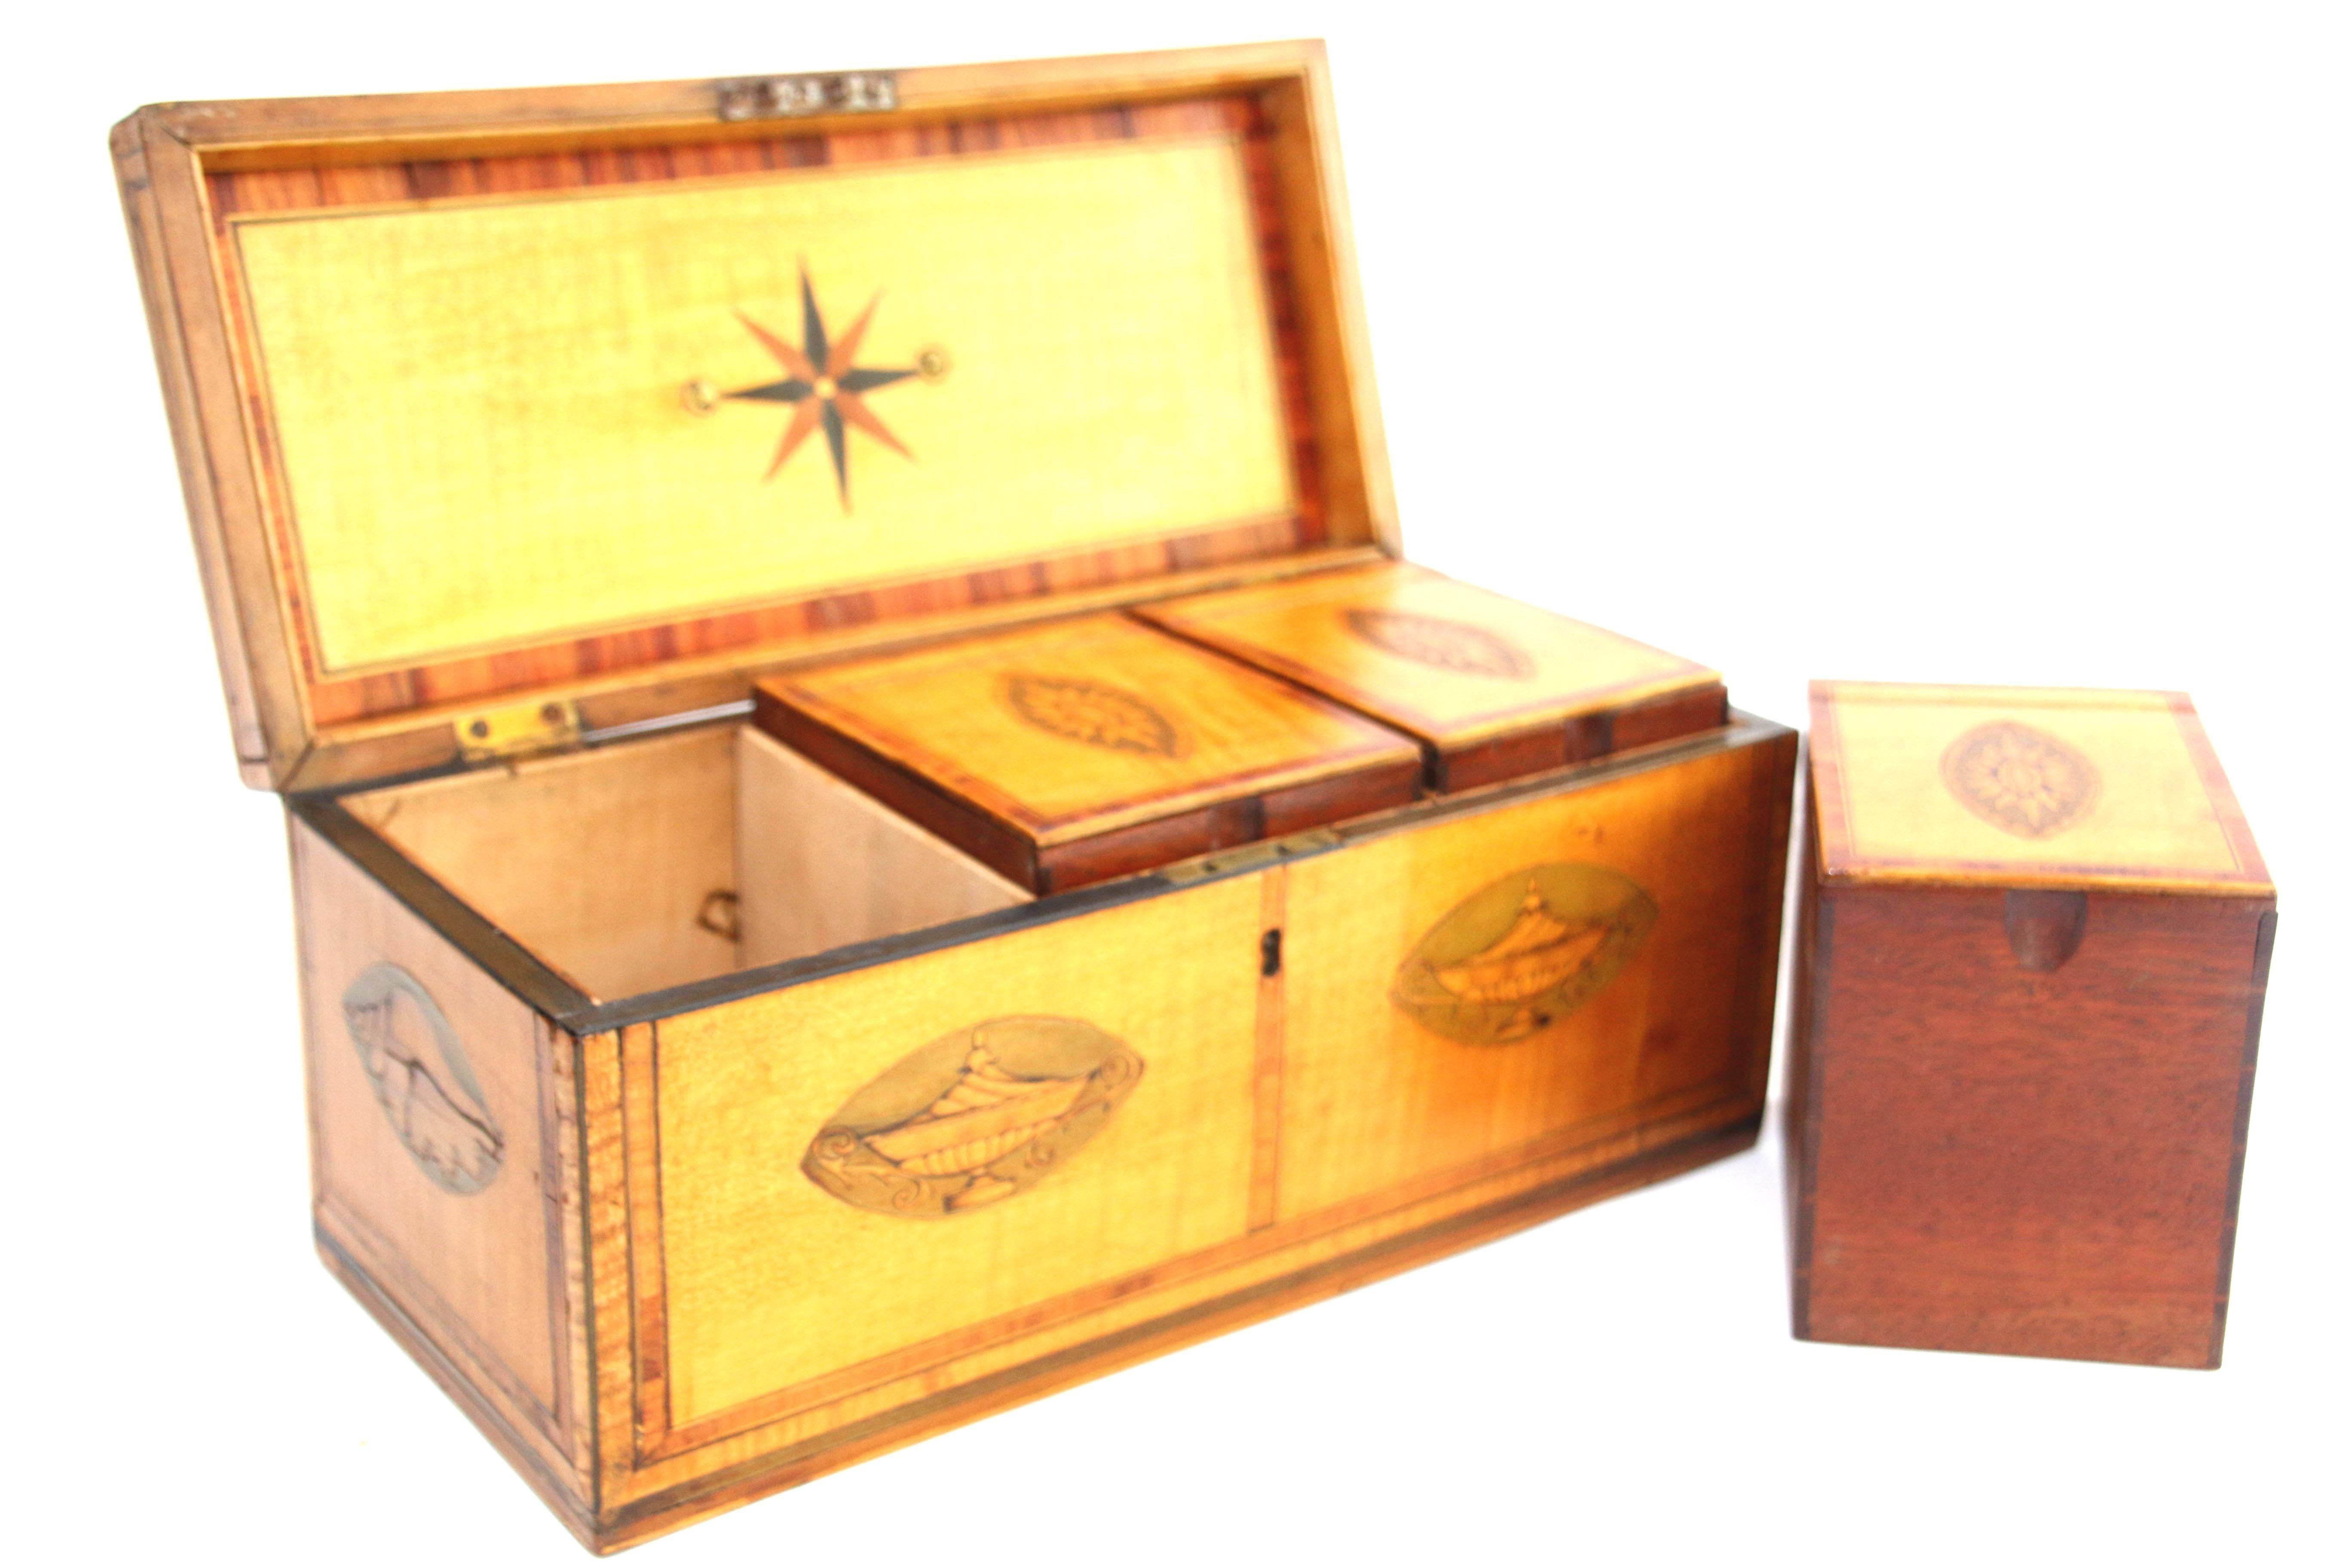 George III rectangular satinwood tea caddy with crossbanded borders, two inlaid leaf motifs flanking the brass handle to the lid along with two inlaid urns decorating the front, and conch shell inlay on both sides. Interior lid retains compass star